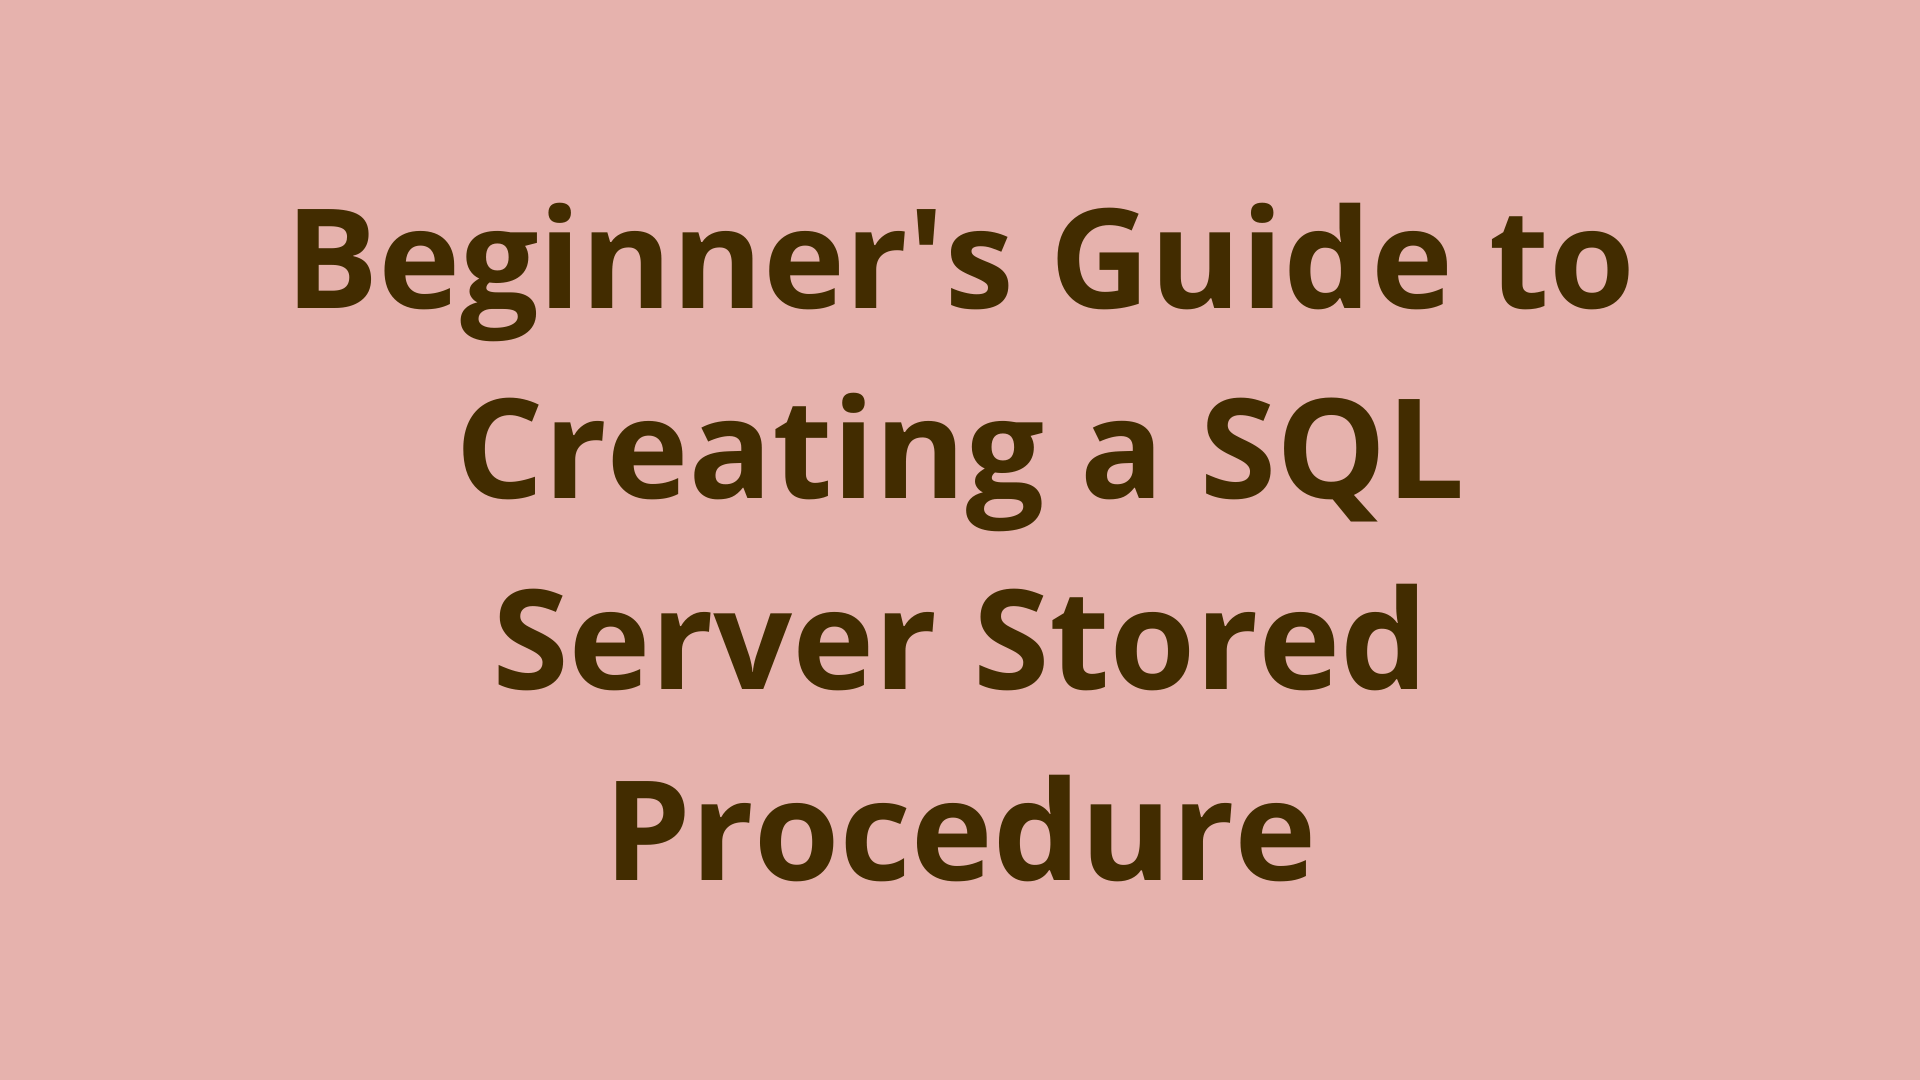 Image of Beginner's guide to creating a SQL Server stored procedure